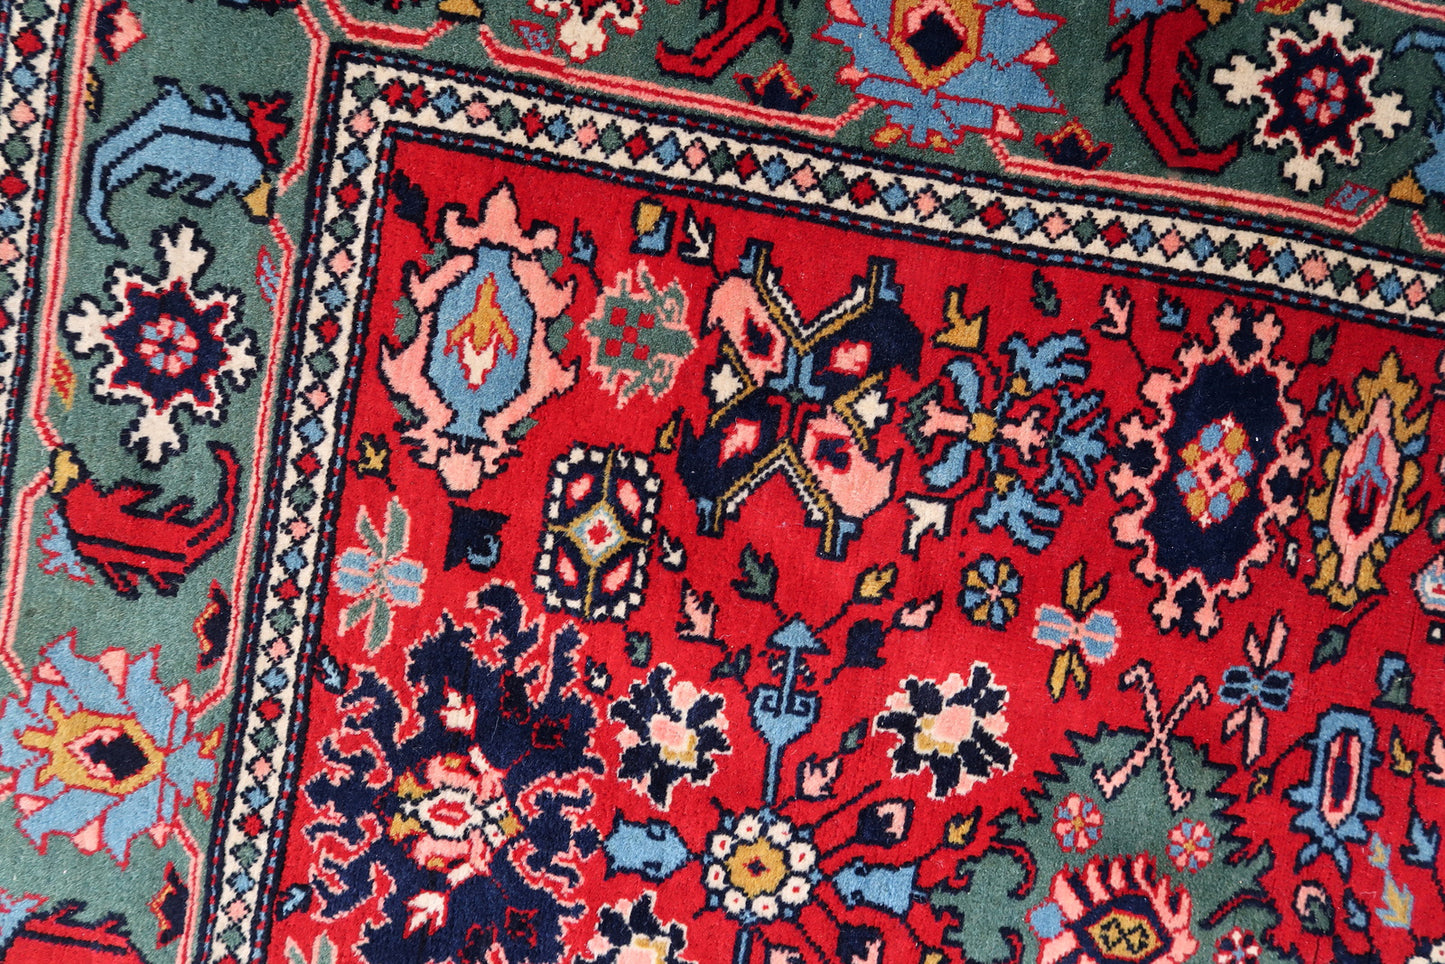 Handmade vintage Persian Tabriz rug in bright red and green colors. The rug is from the end of 20th century, it is in original good condition.